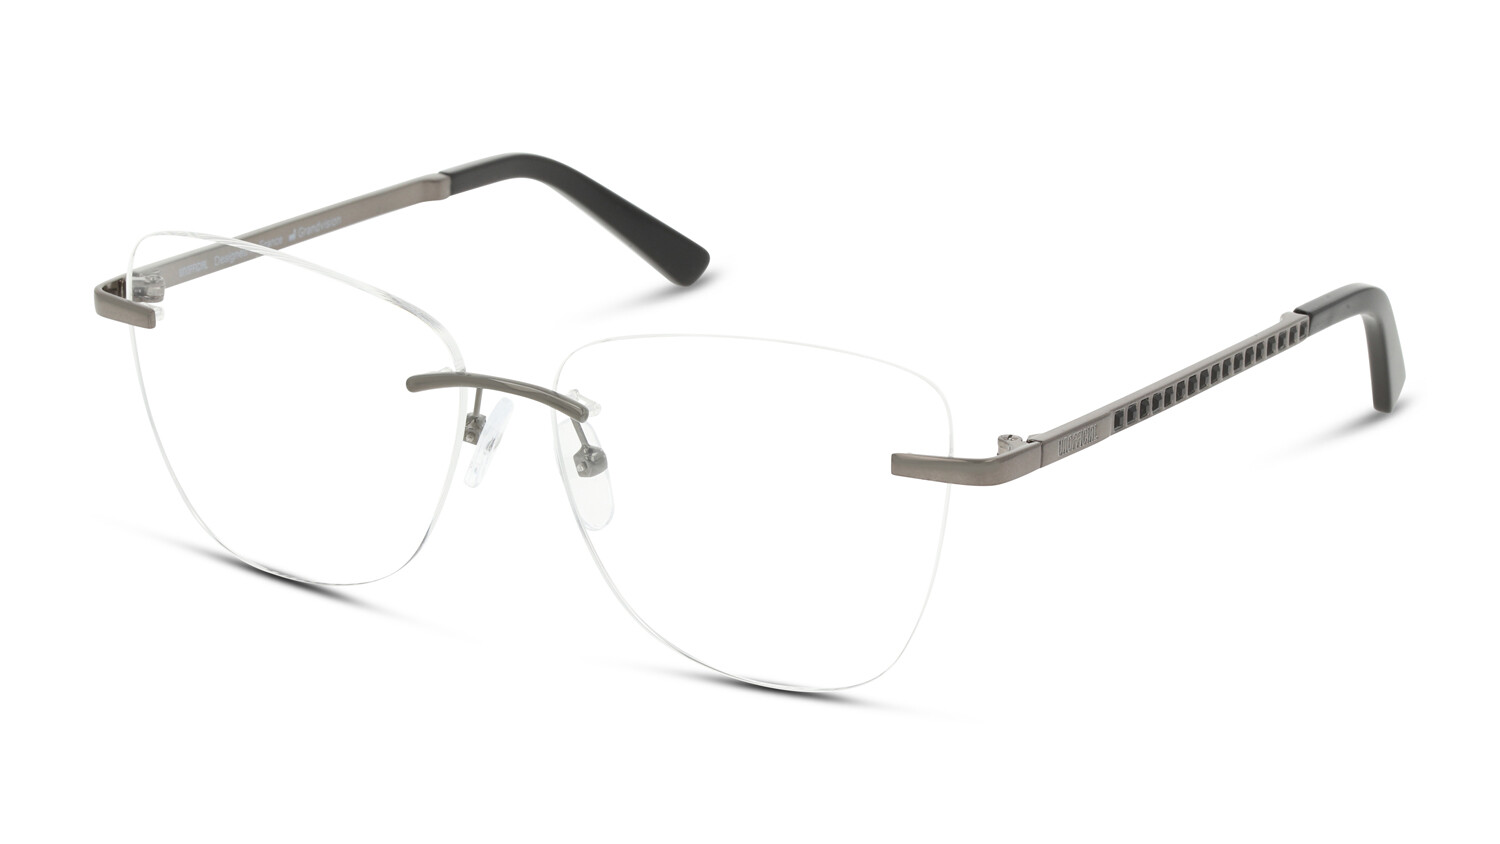 Angle_Left01 UNOFFICIAL UNOF0468 GG00 Brille Grau